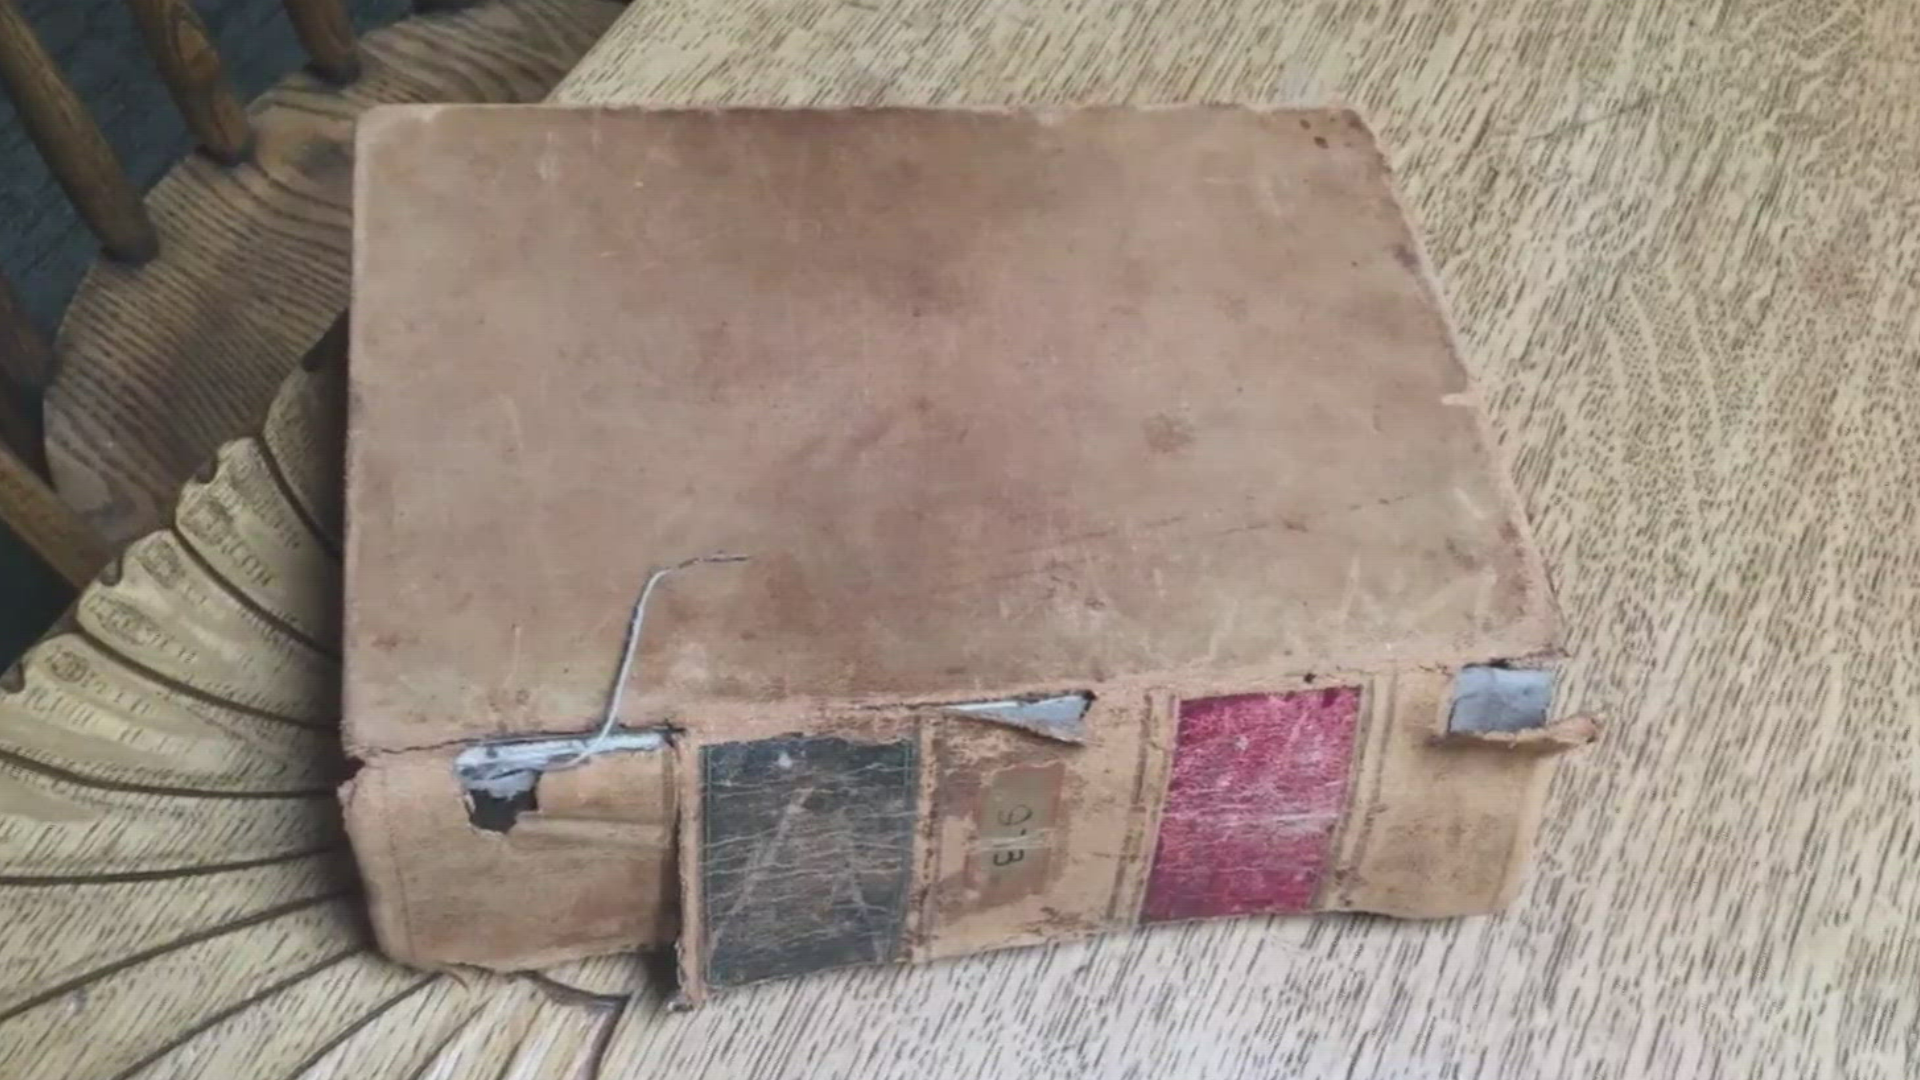 An extremely overdue library book was found after being packed away for almost 100 years.